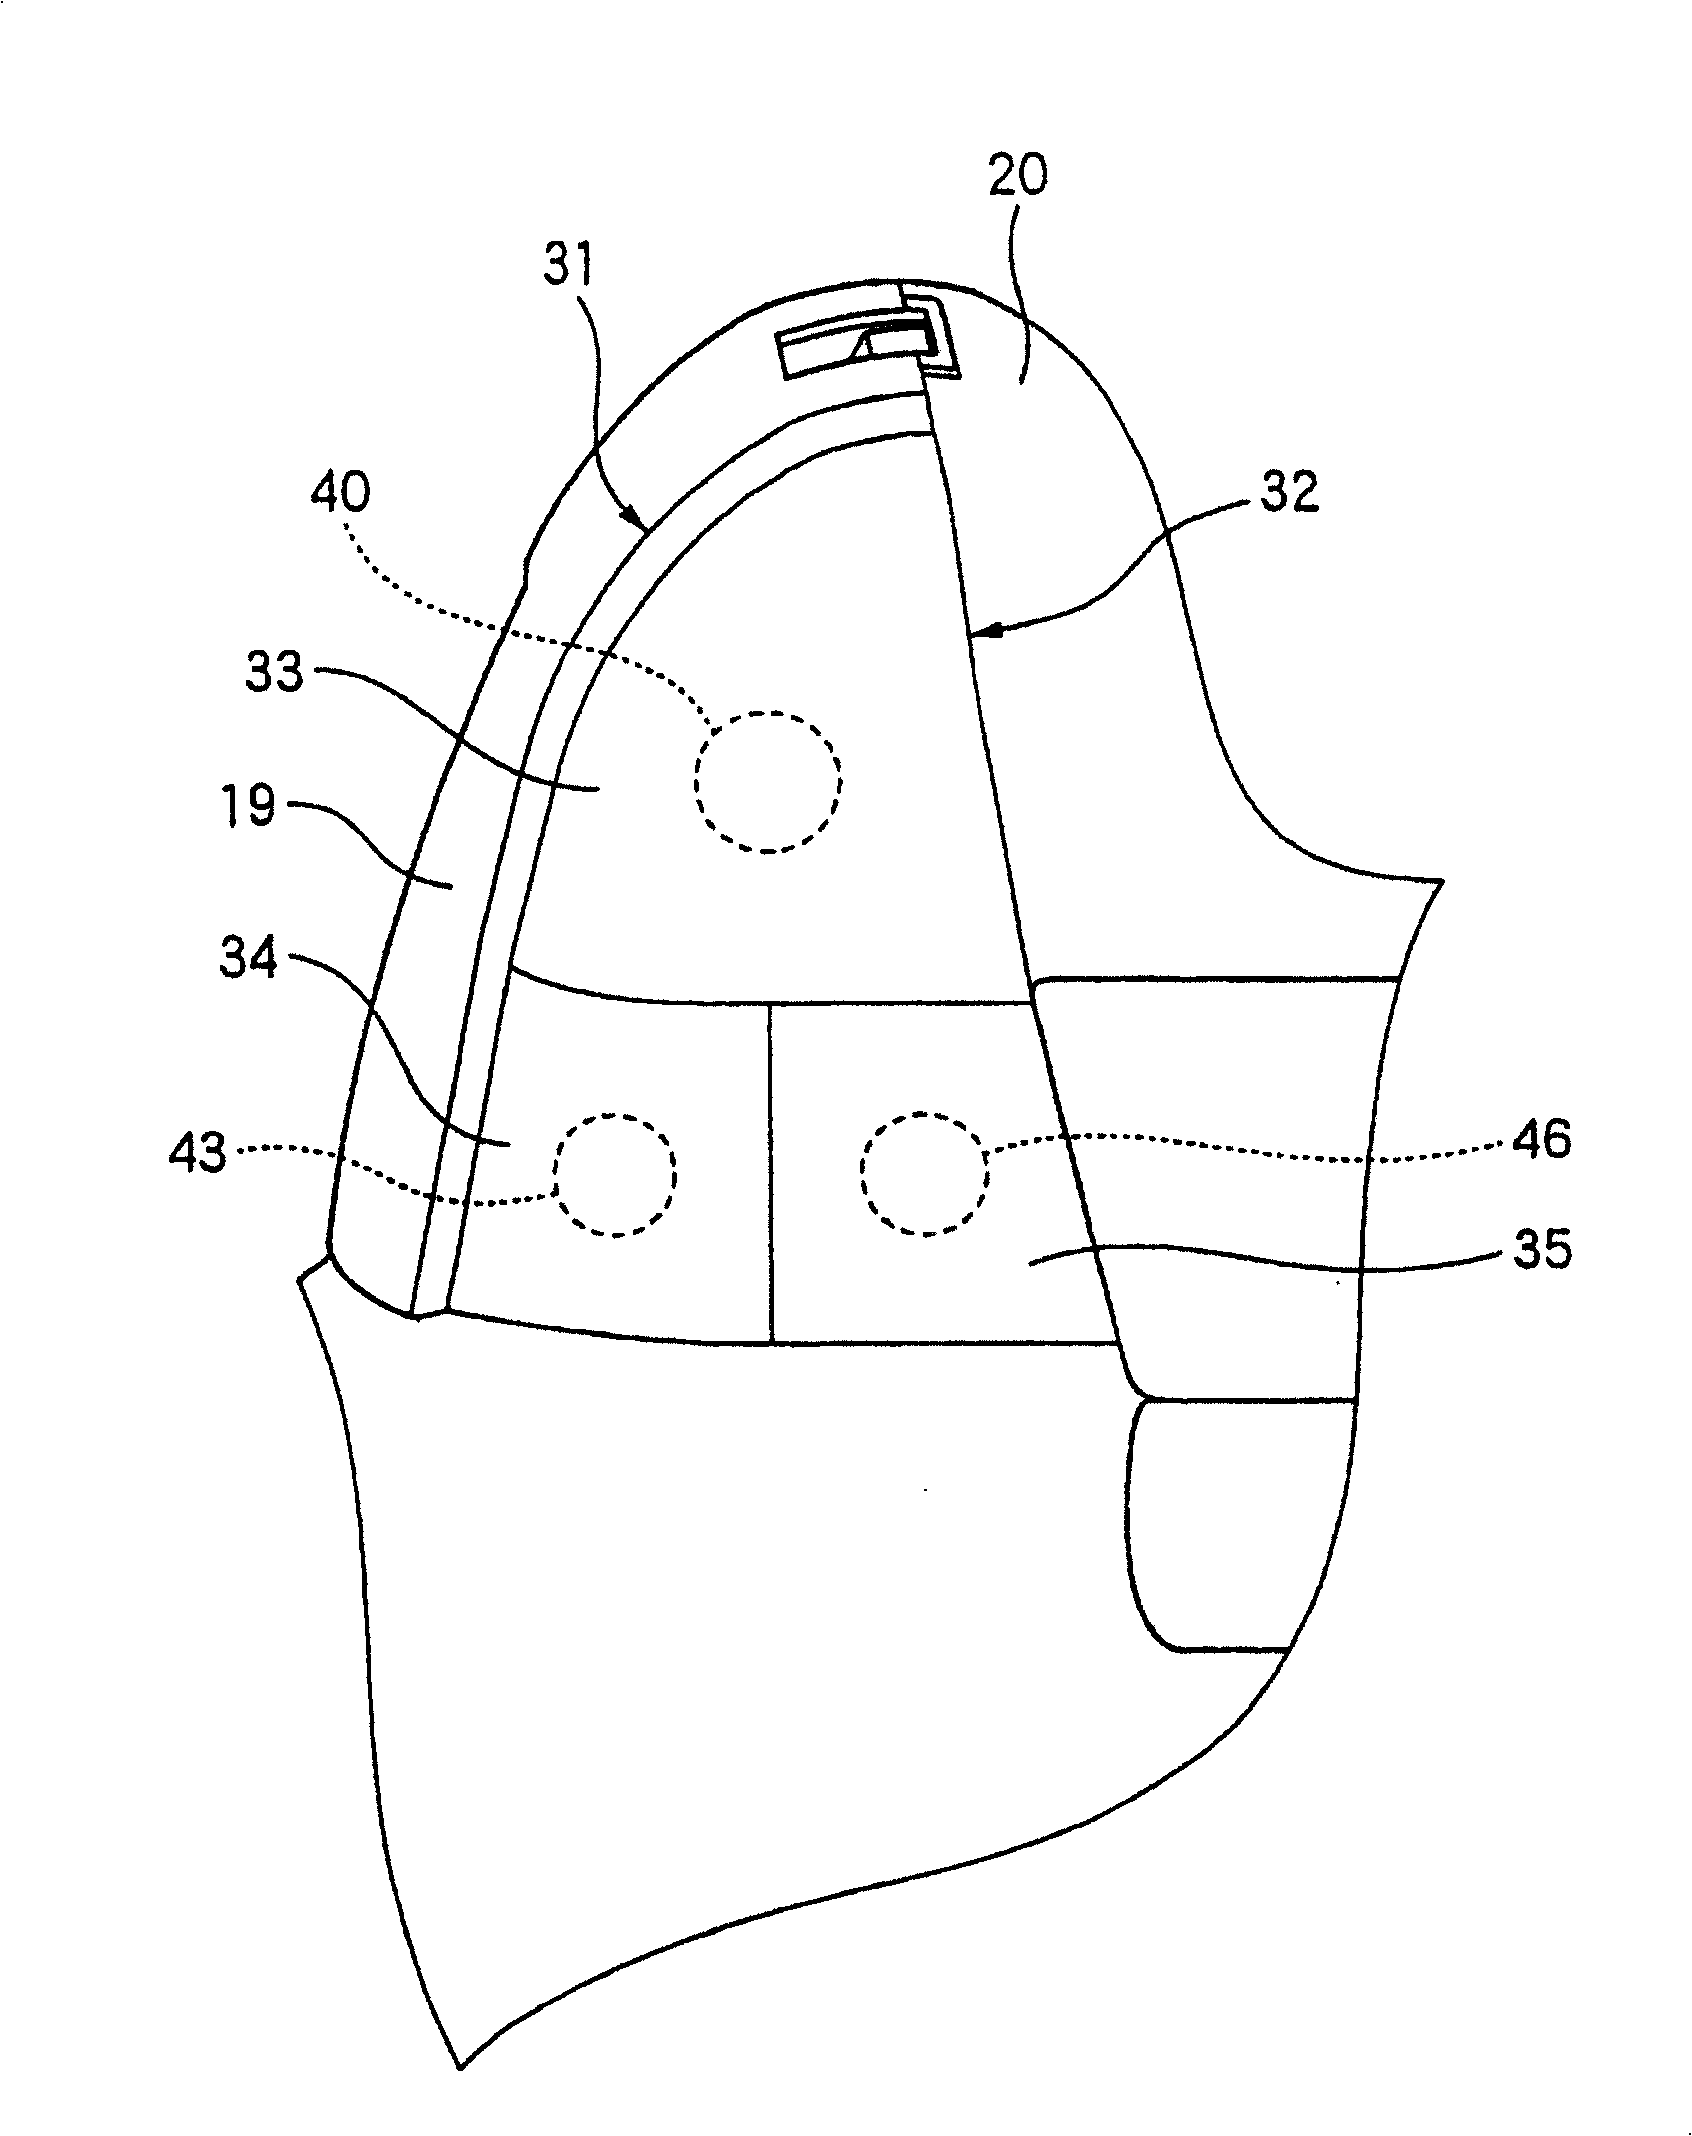 Installation structure of lighting device for vehicle